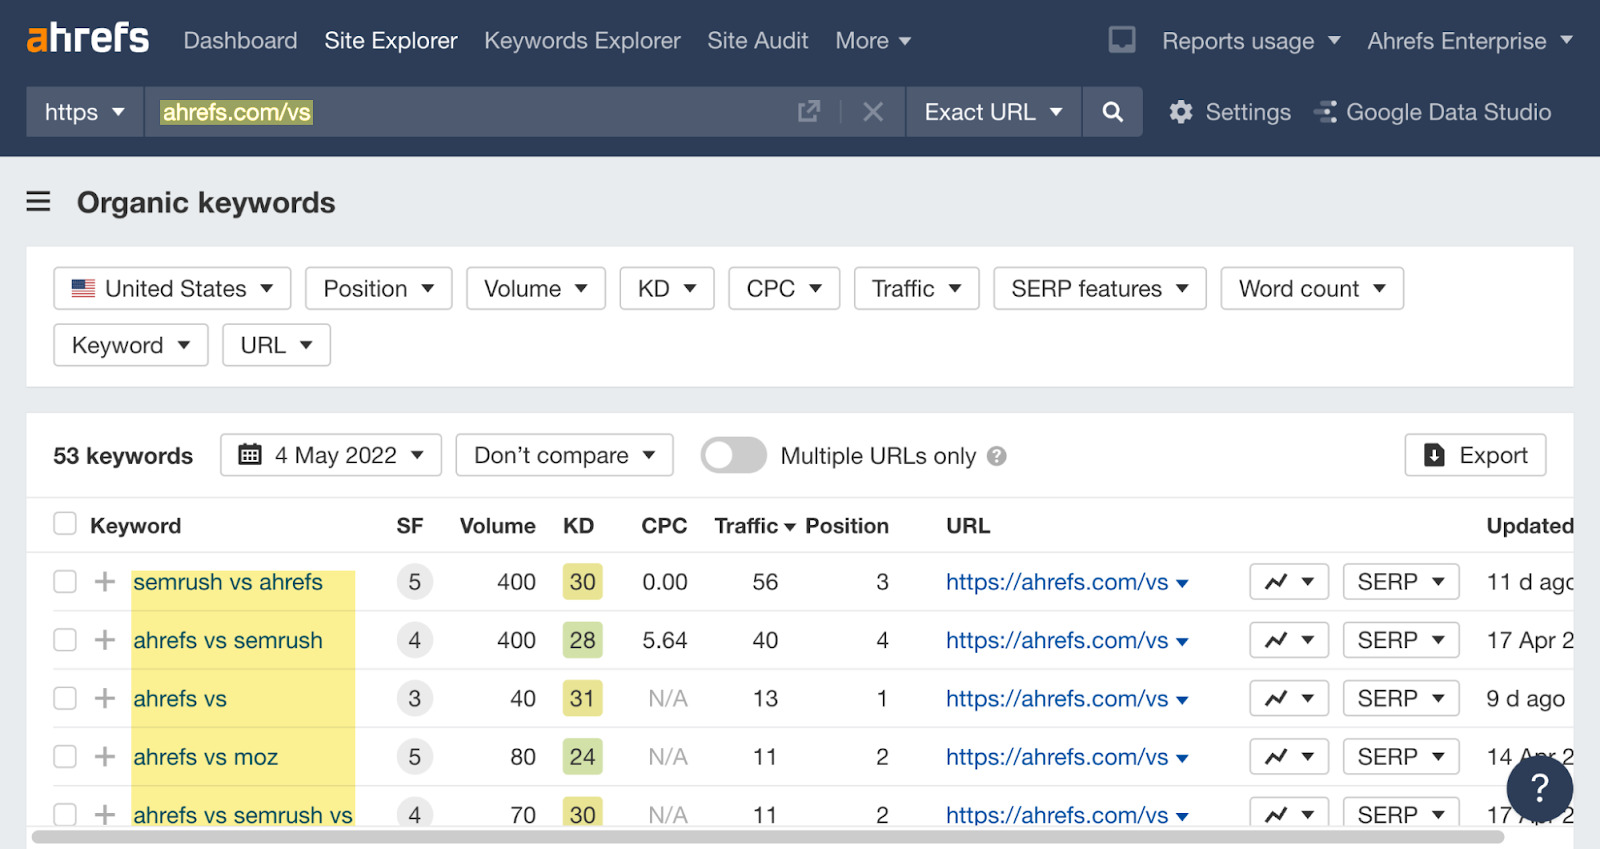 Organic keywords report results for Ahrefs' 